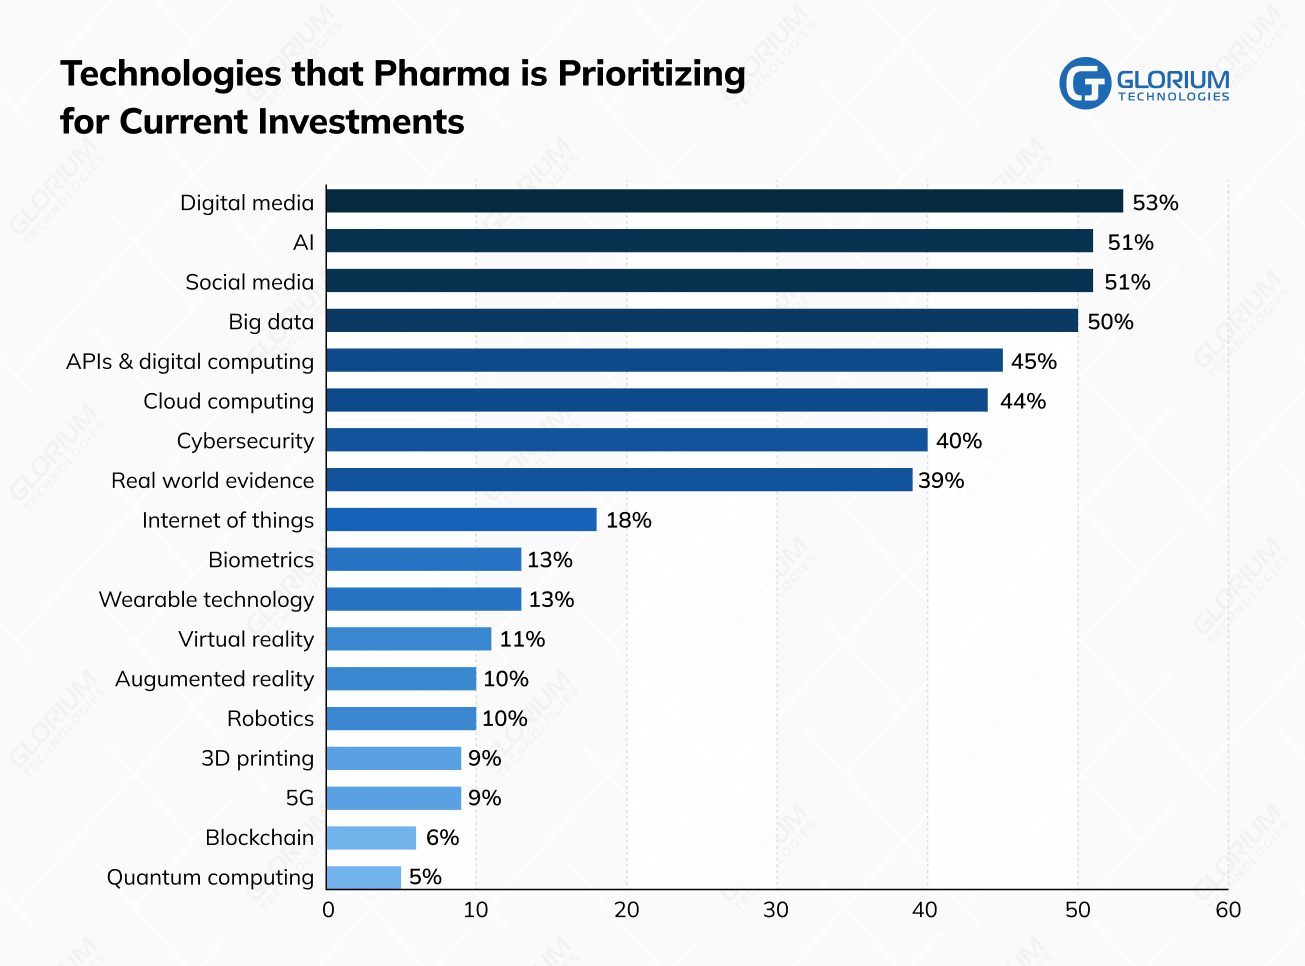 Technologies that Pharma is Prioritizing for Current Investments